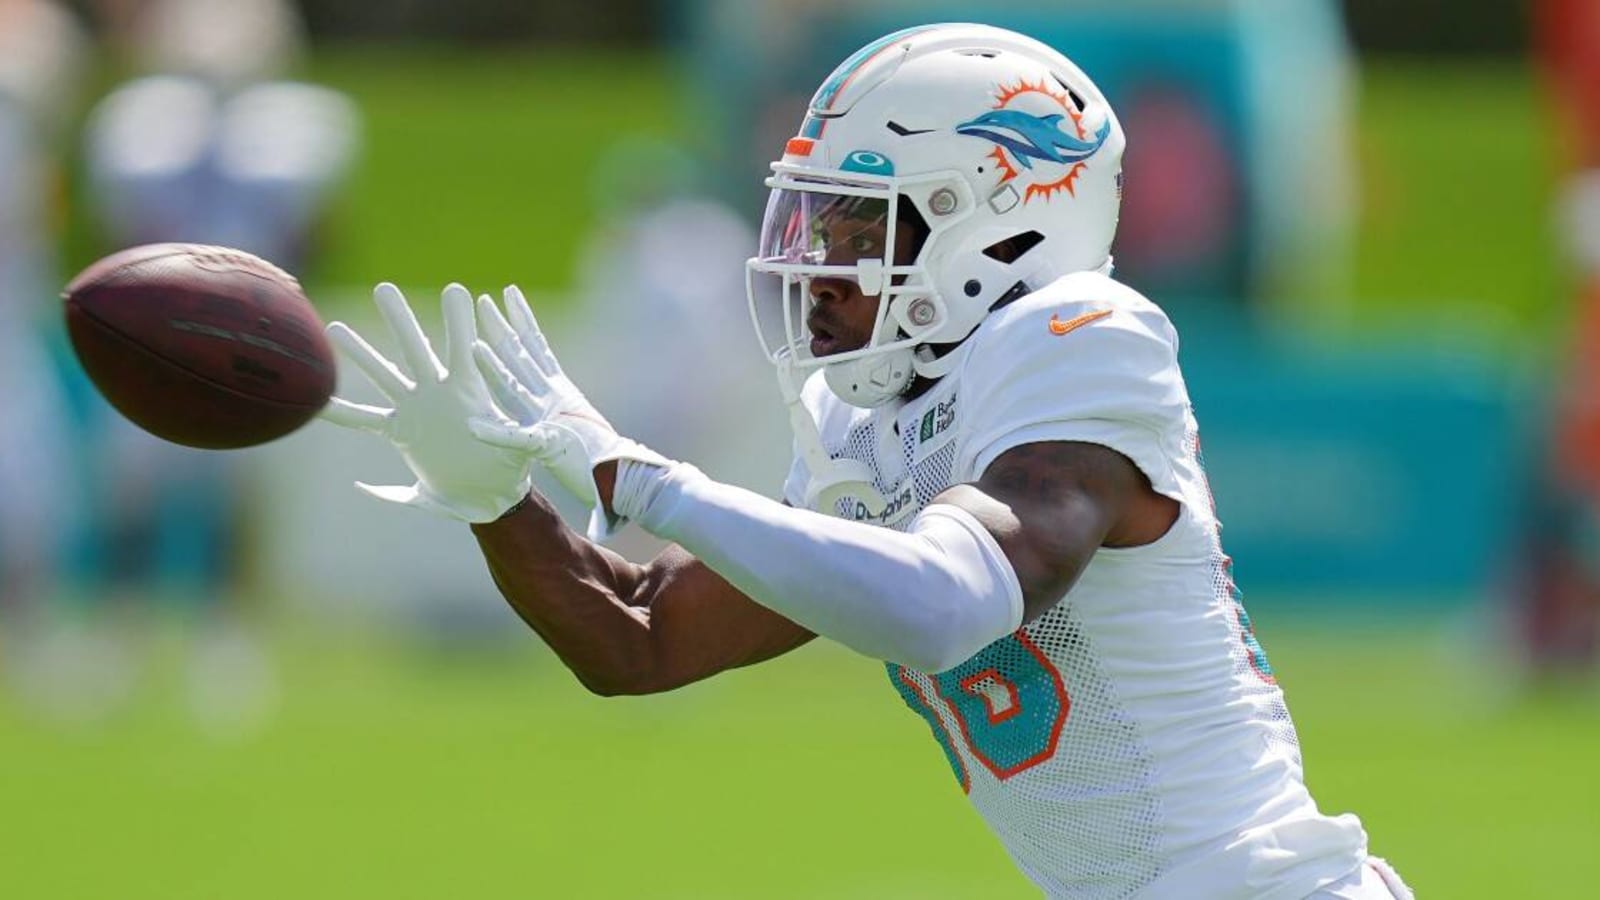 Second-year Dolphins receiver Braylon Sanders carted off at training camp practice